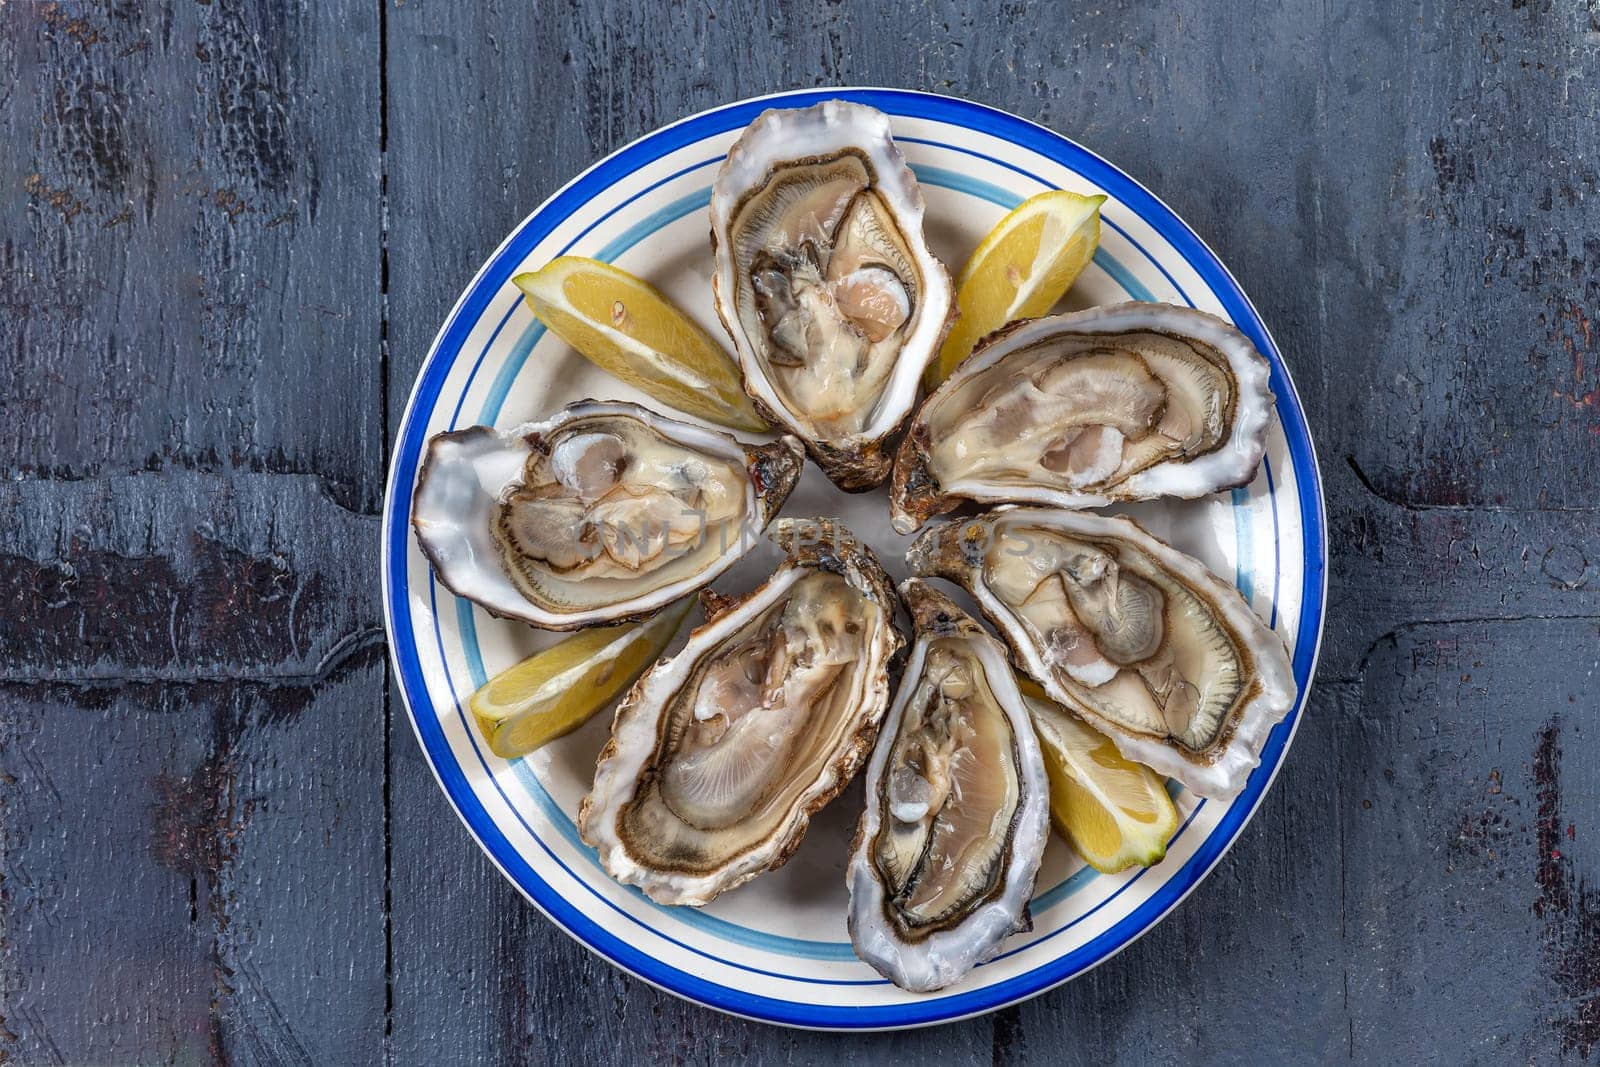 oysters fresh plate healthy meal fon the table copy space food background rustic top view